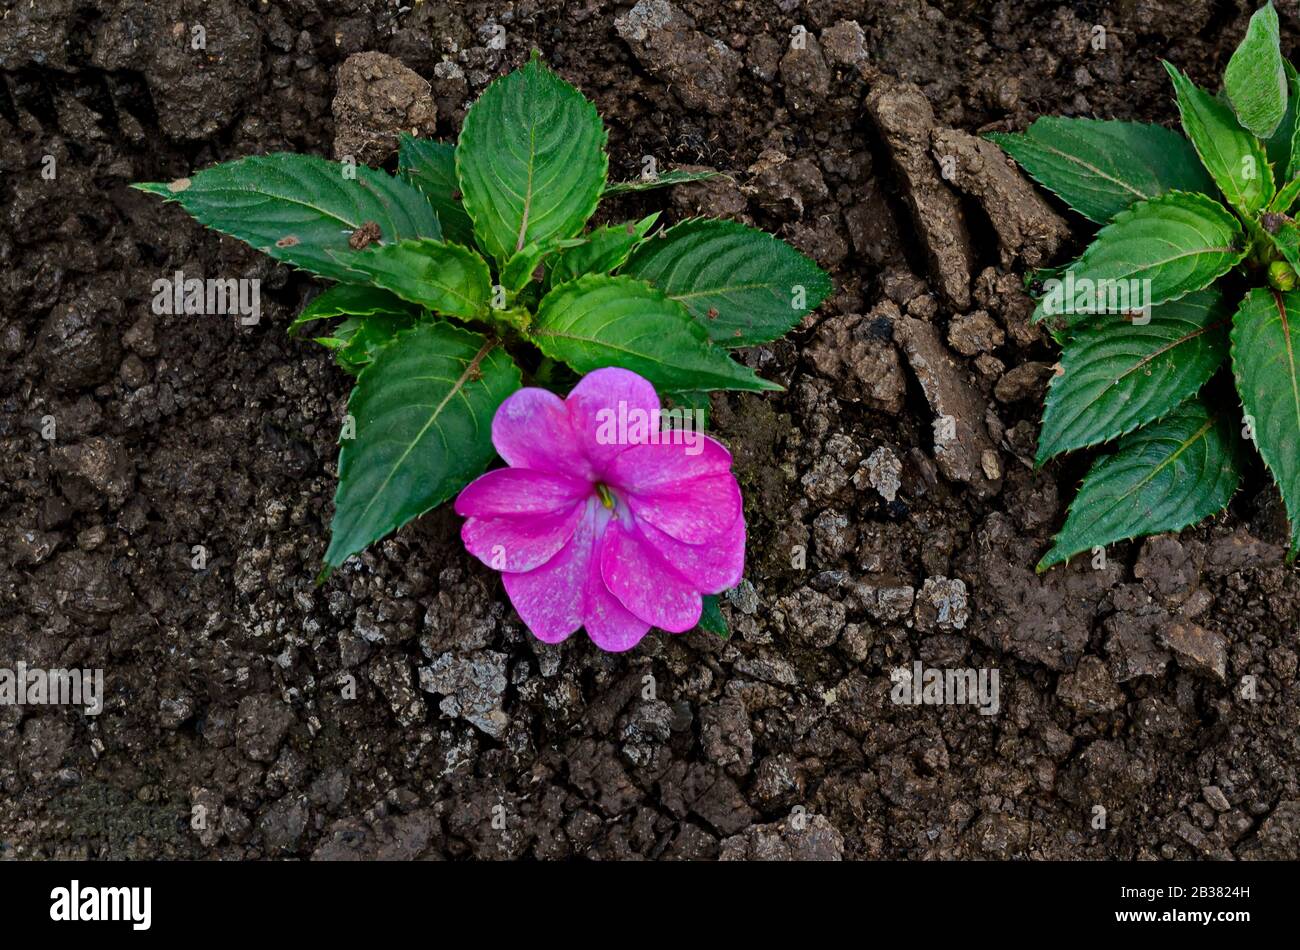 Pink white flower of Impatiens flower with green toothed leaves growing in garden, Sofia, Bulgaria Stock Photo